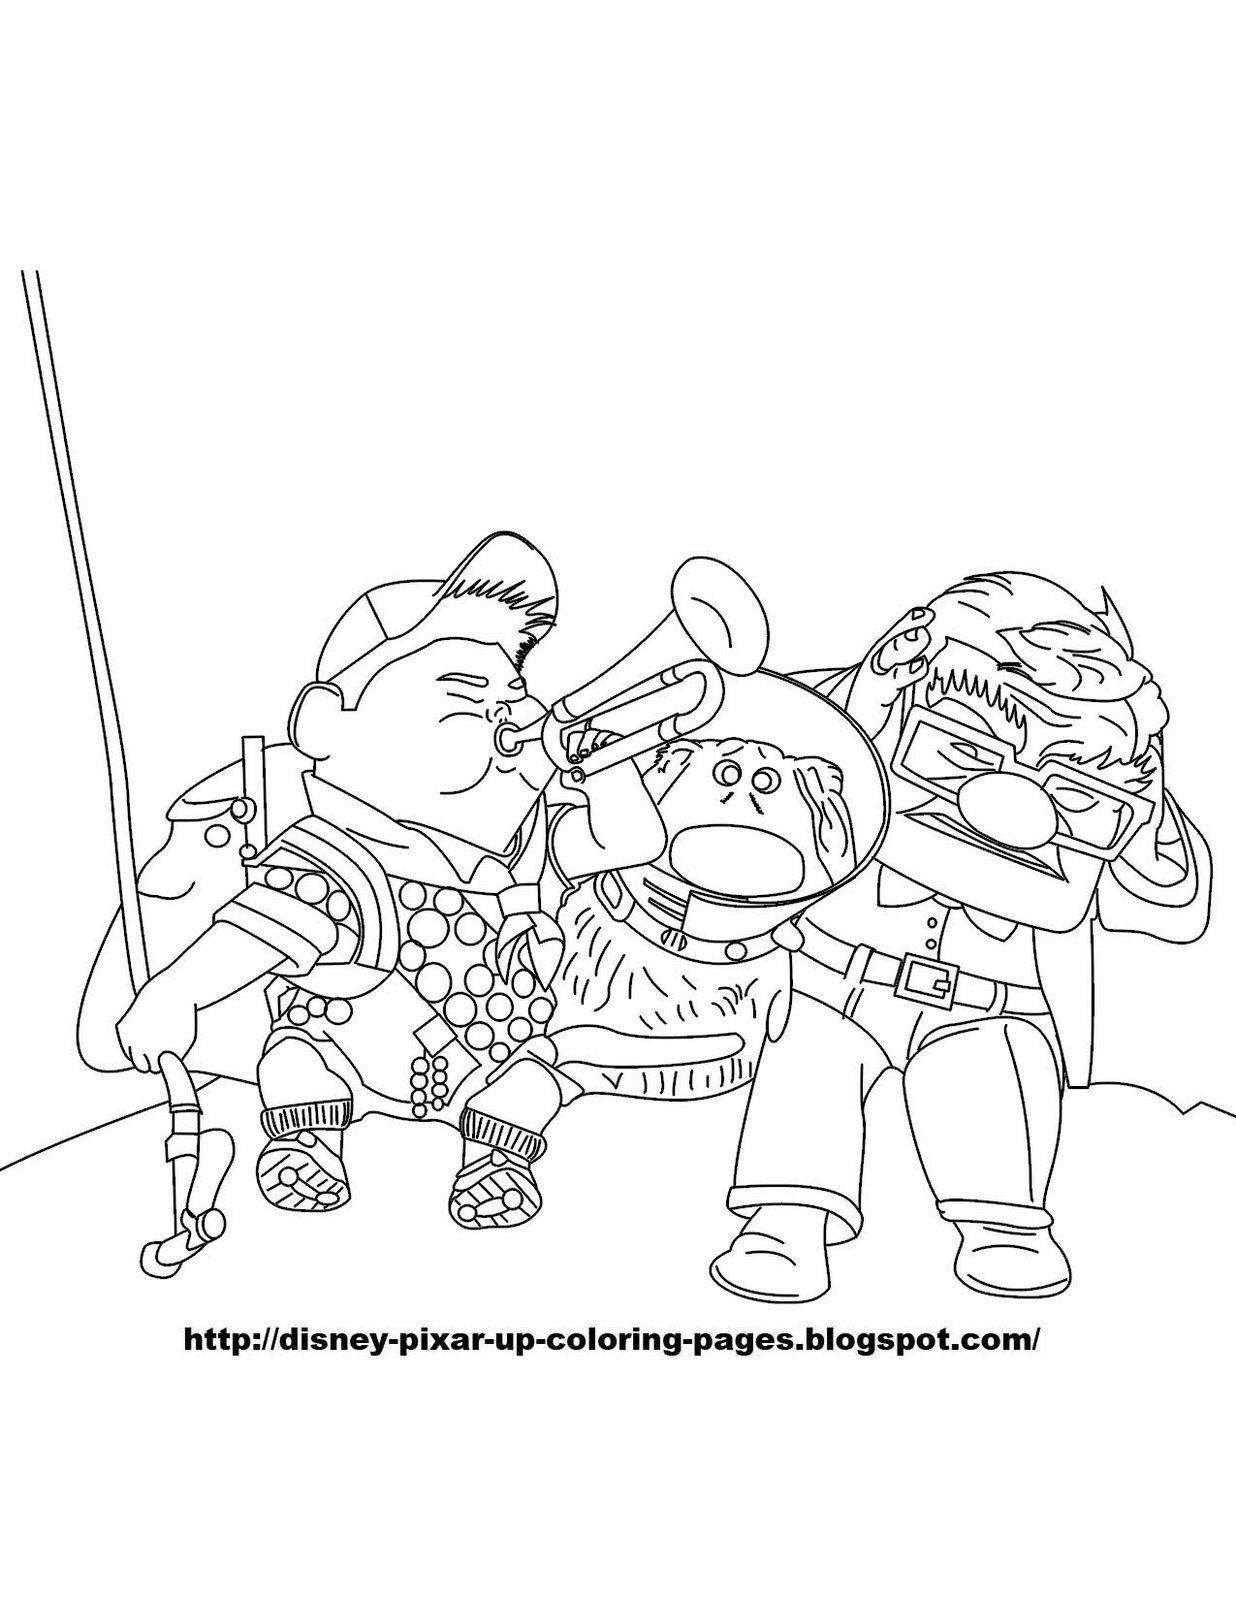 Disney Coloring Pages - Thousands of Free Disney Coloring Pages from